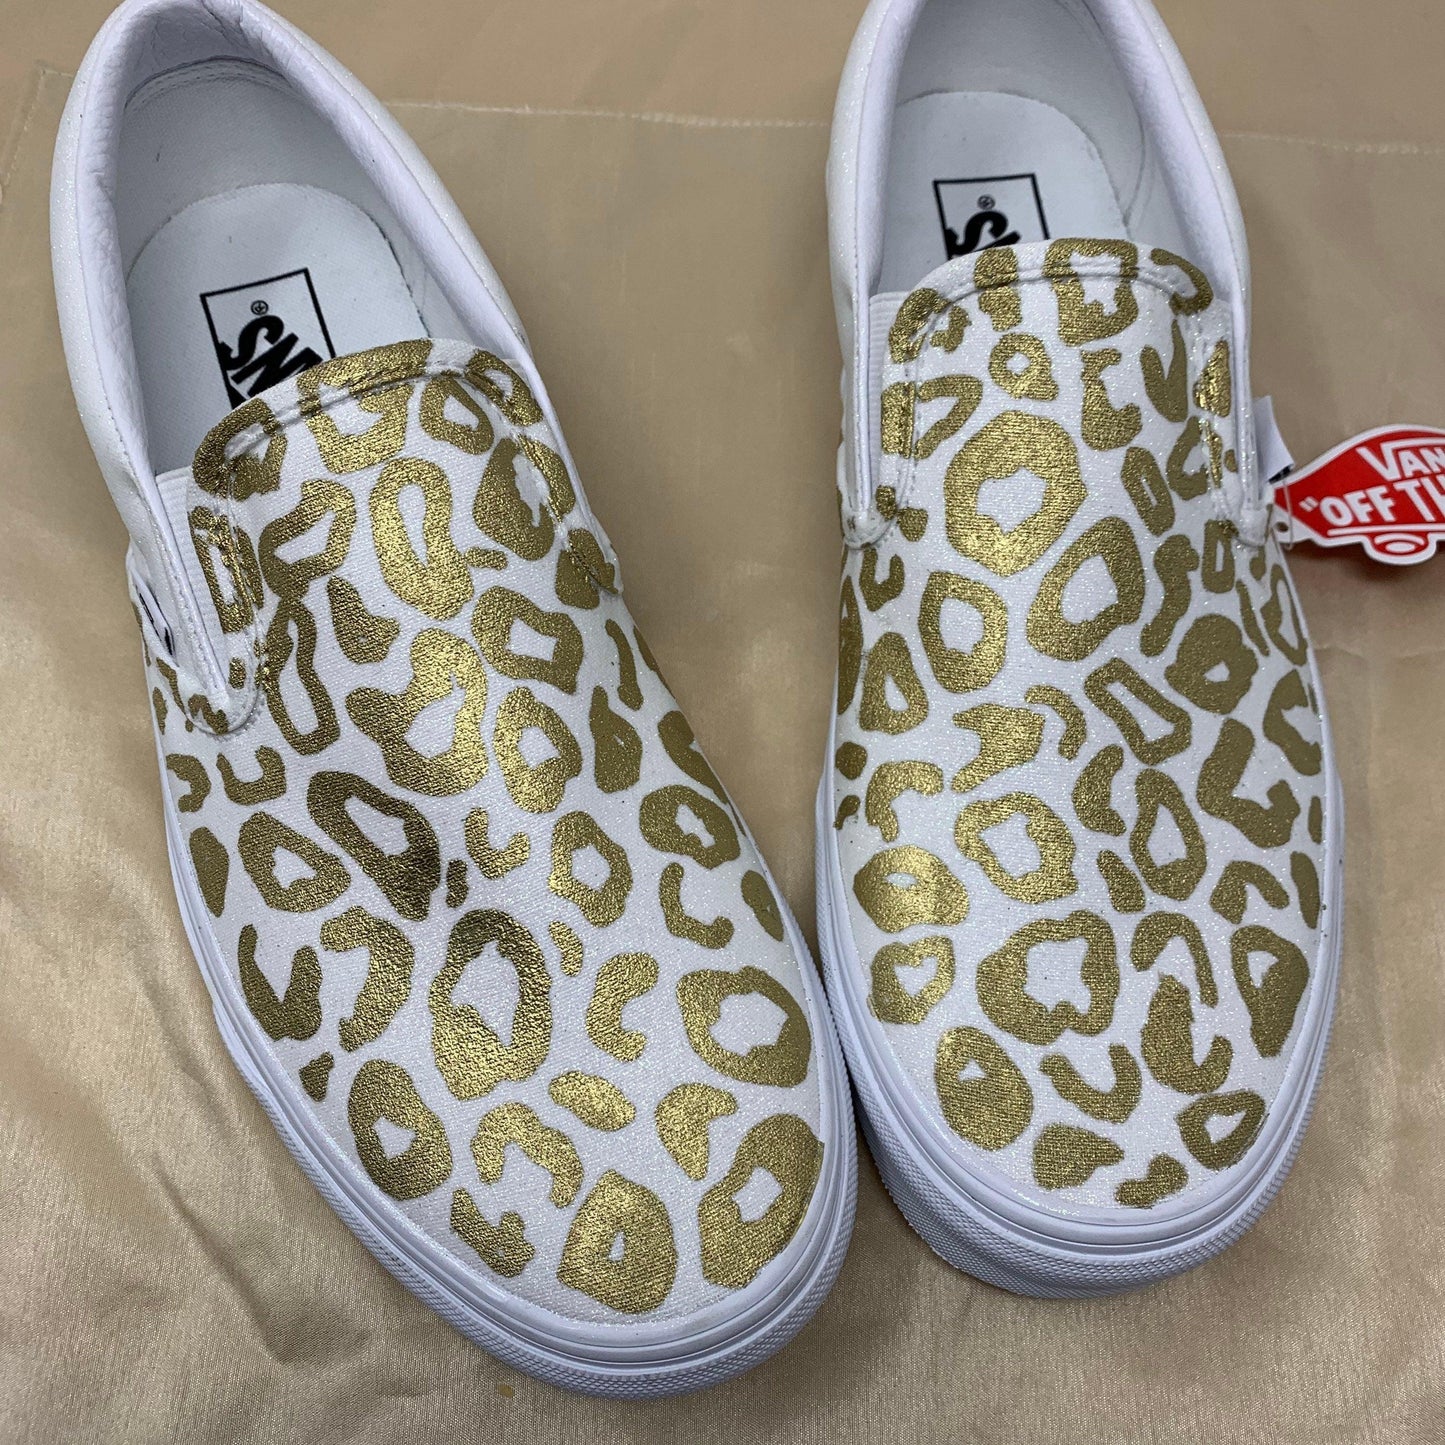 Cheetah Print Shoes-Shoes-ButterMakesMeHappy